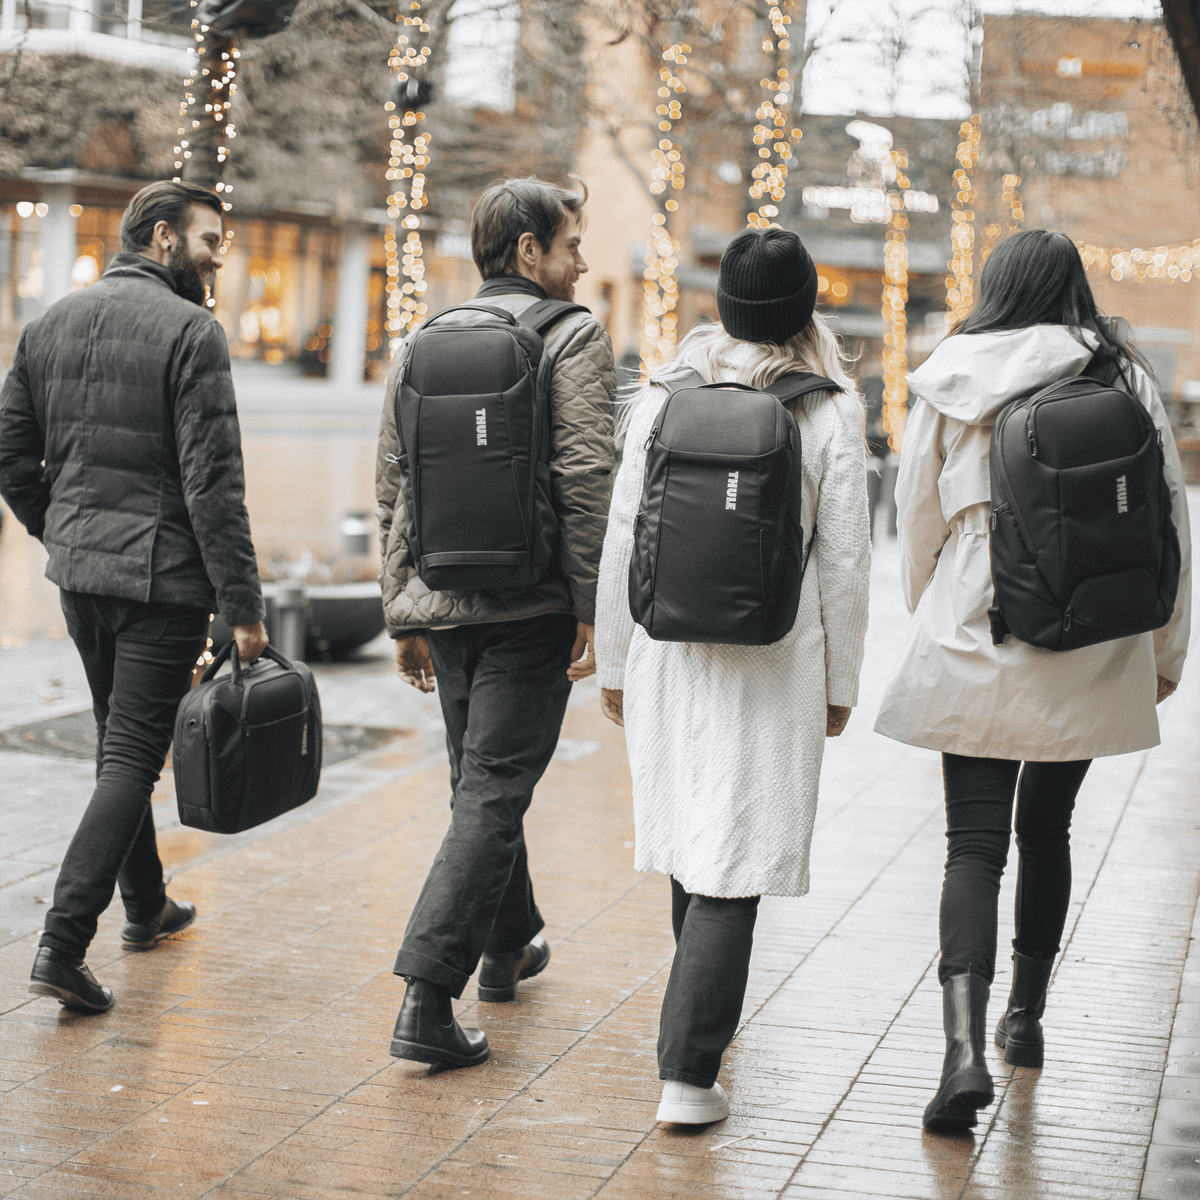 Four people walk down a rainy street wearing black Thule Accent backpacks.